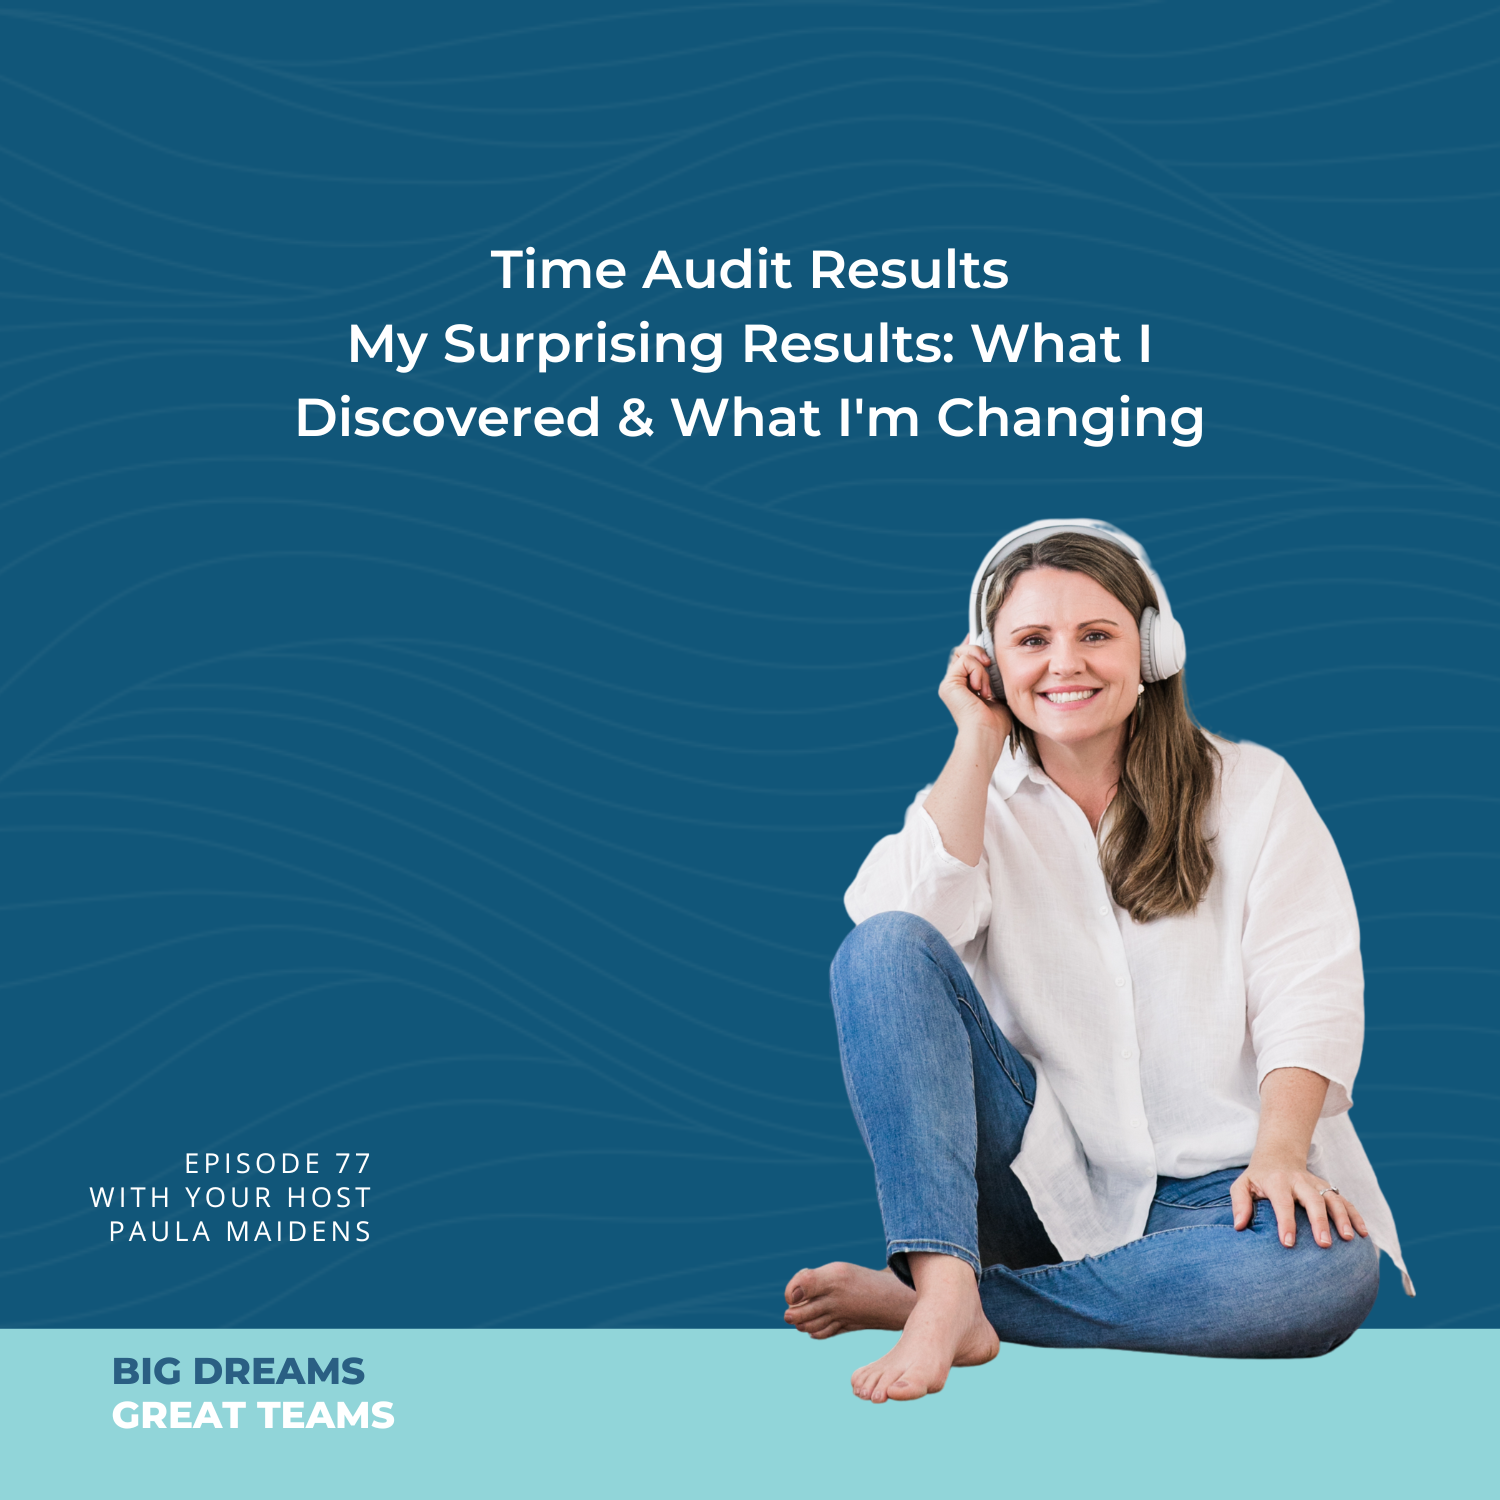 Time Audit Results - My Surprising Results: What I Discovered & What I'm Changing